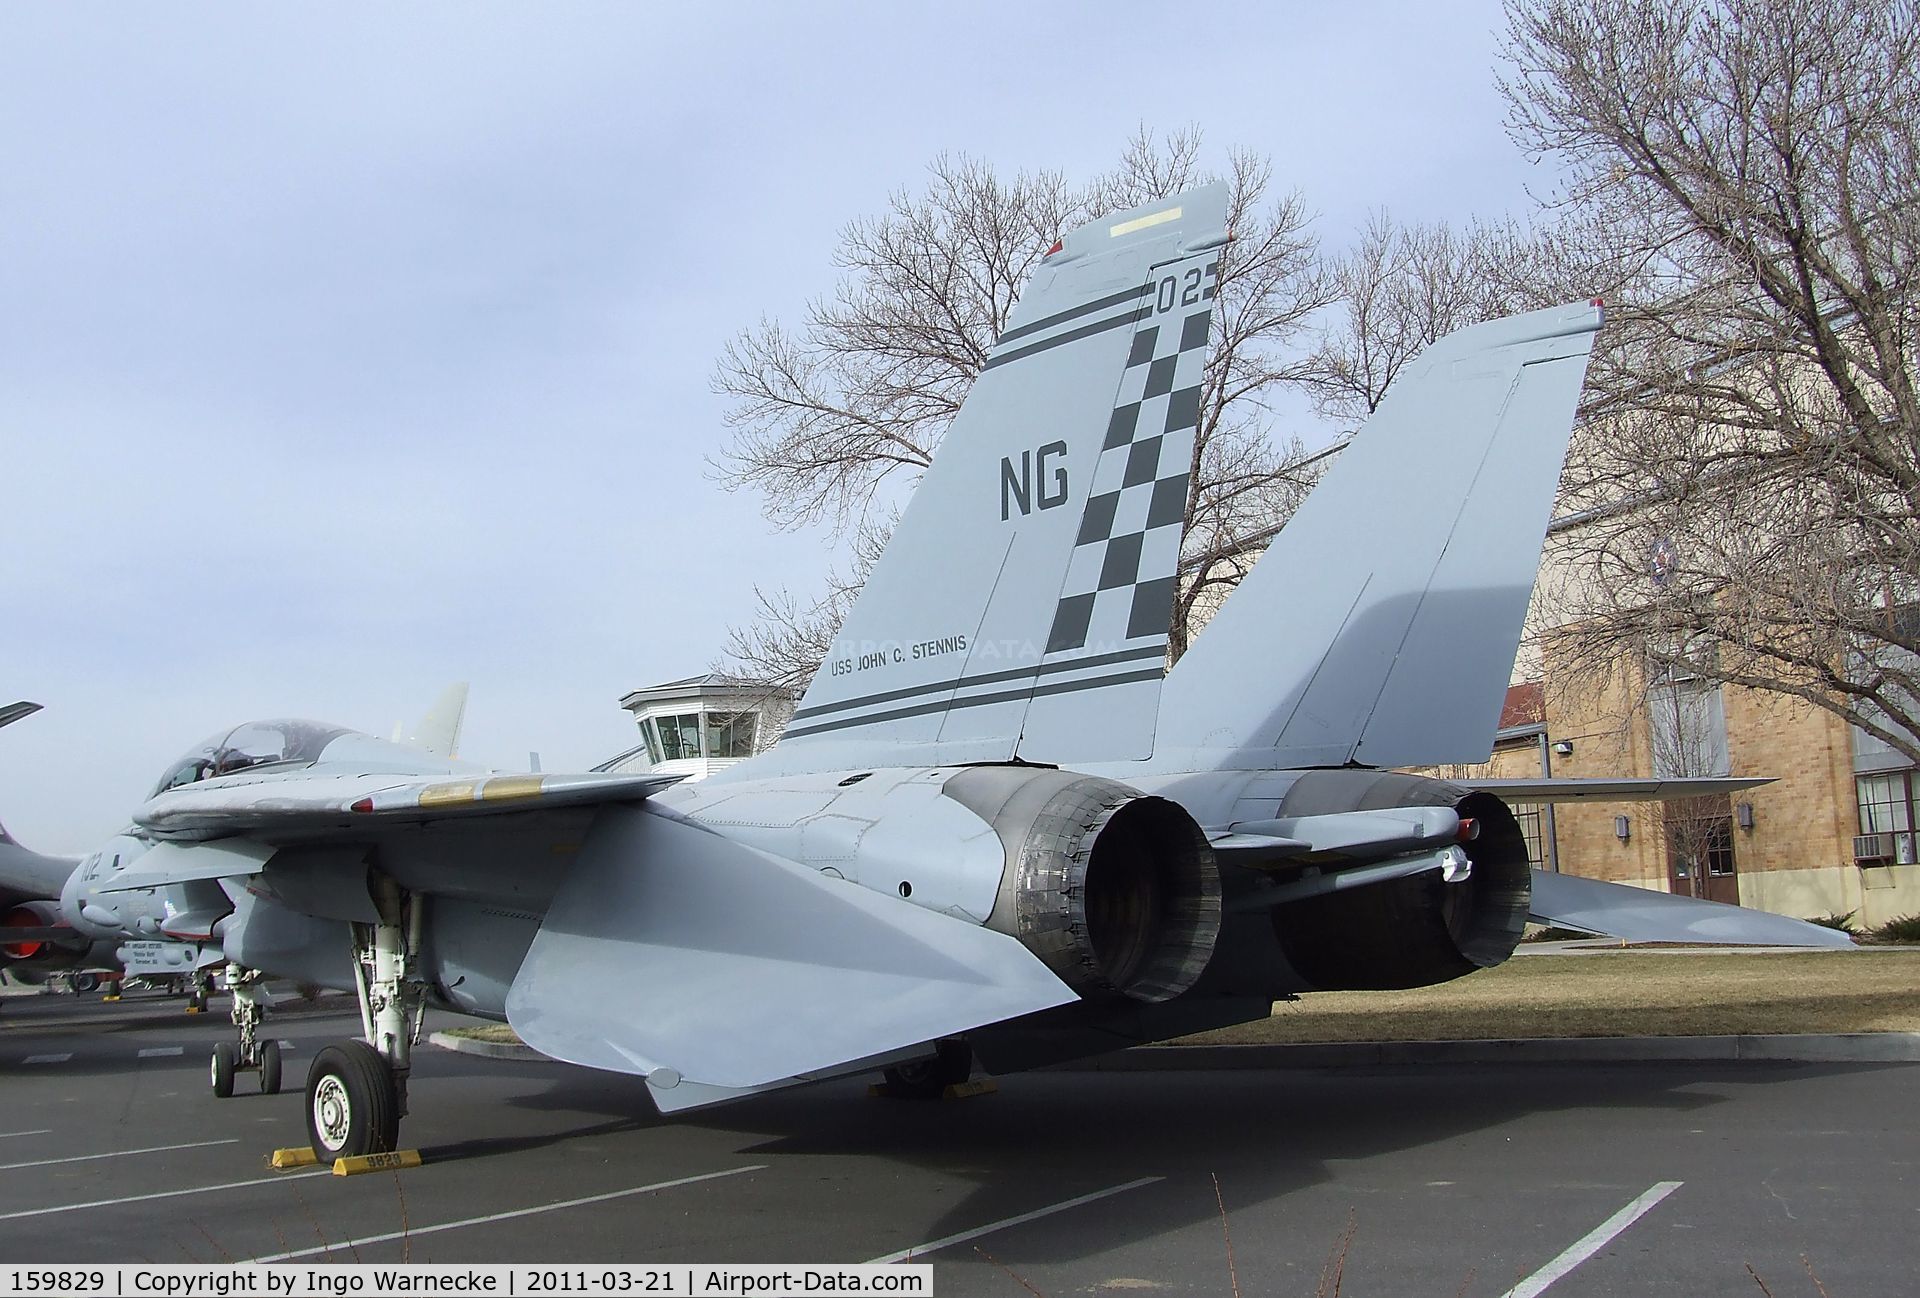 159829, Grumman F-14A Tomcat C/N 189, Grumman F-14A Tomcat at the Wings over the Rockies Air & Space Museum, Denver CO